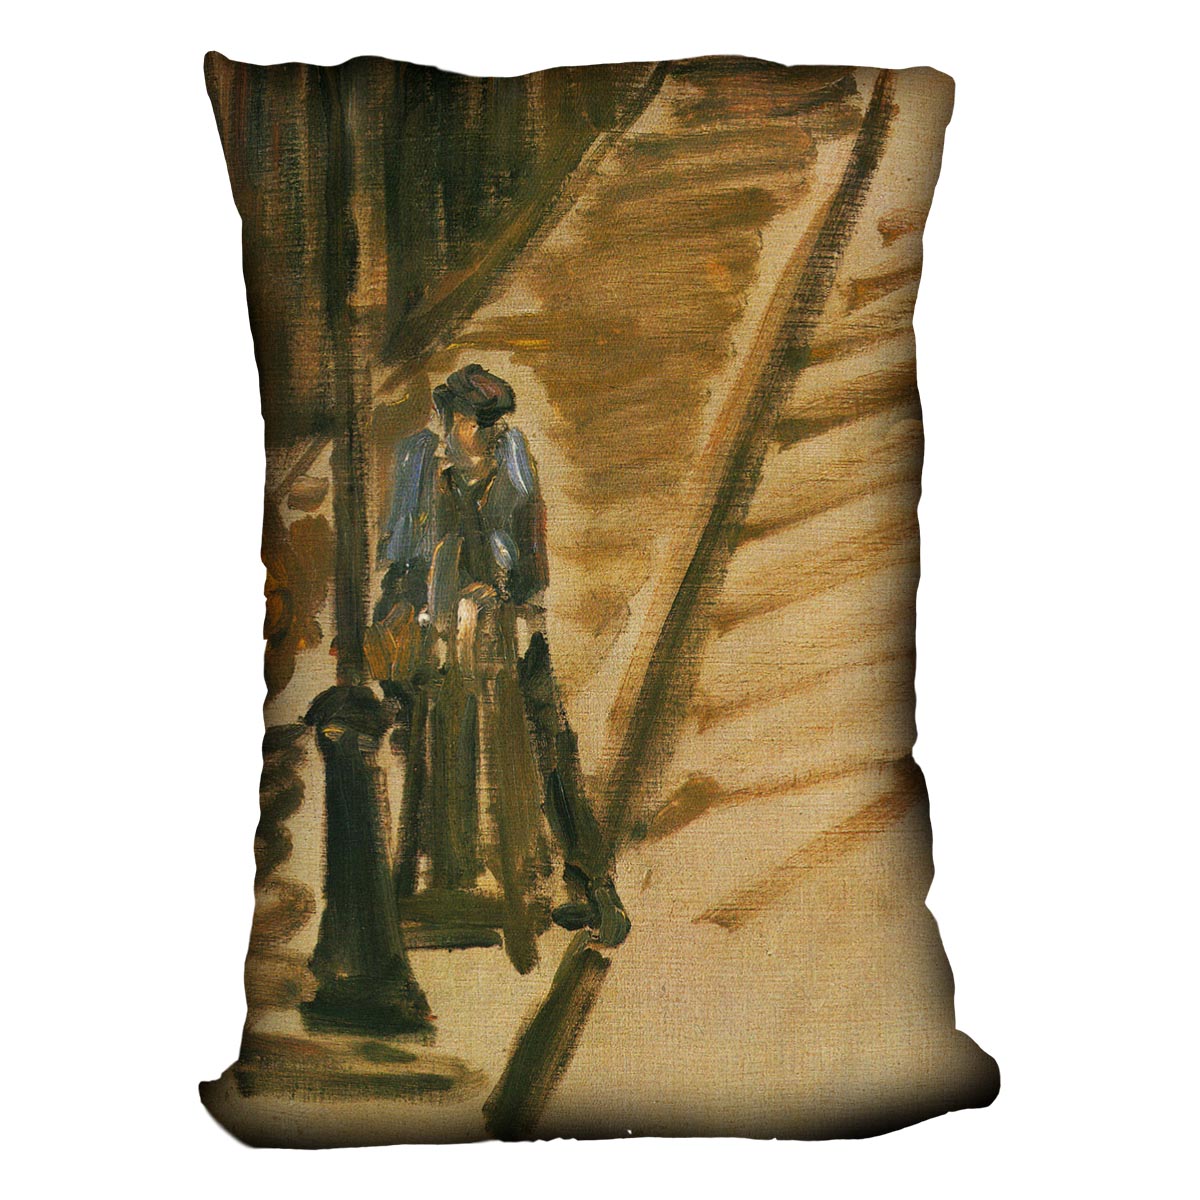 Rue Mossnier with Knife Grinder by Manet Cushion